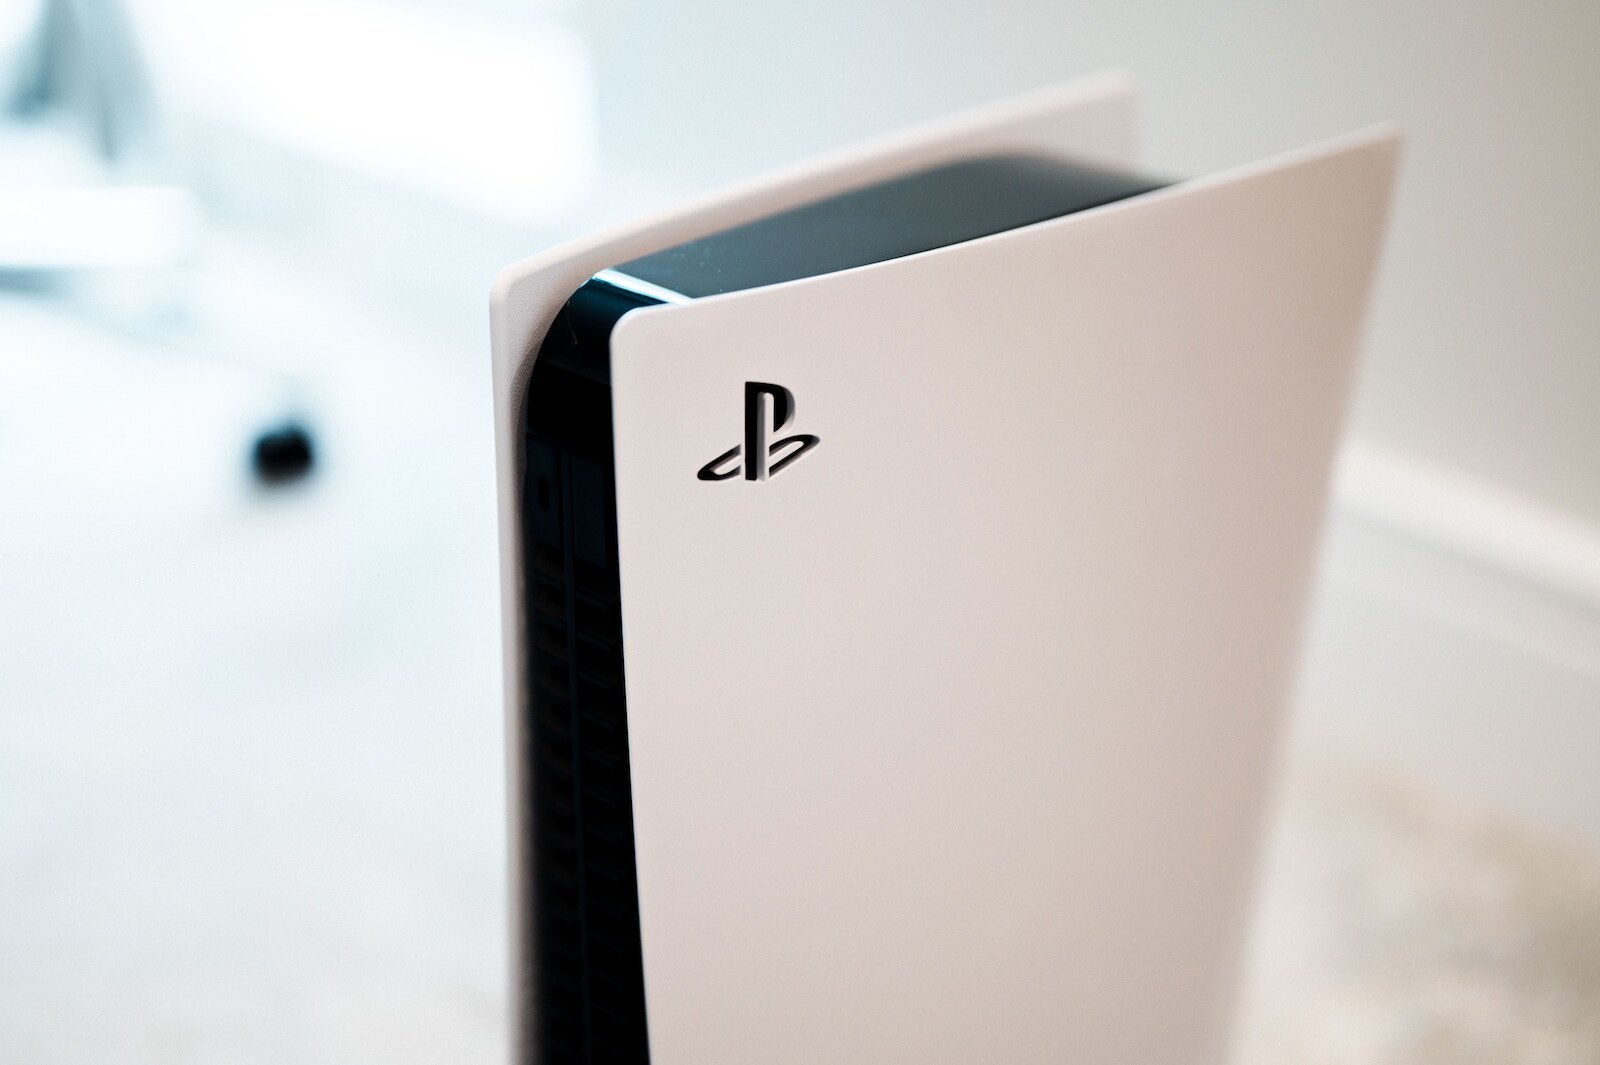 PS5 Slim coming out this year says…. Microsoft – Playstation